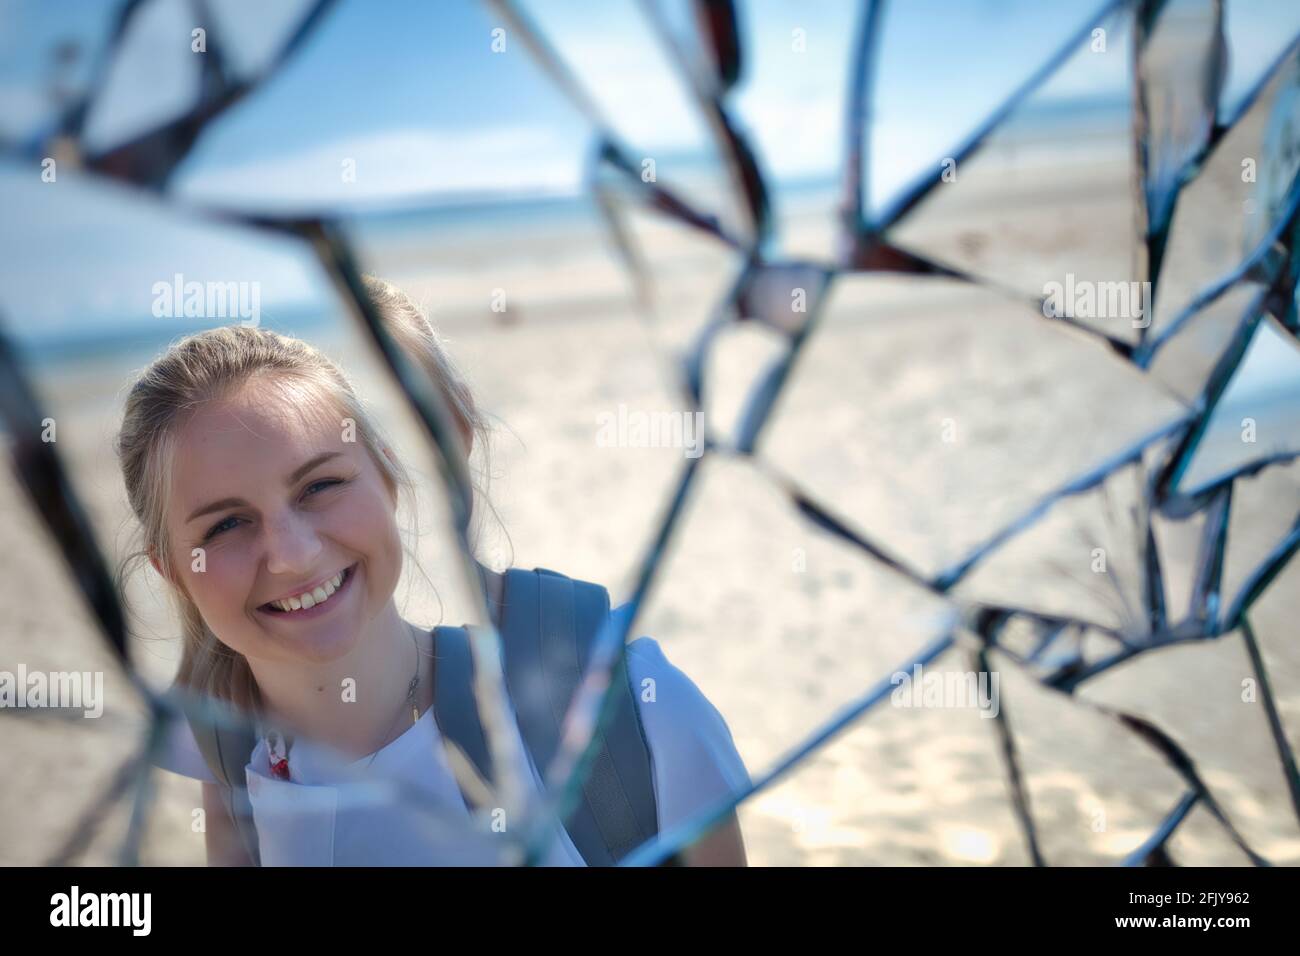 Reflection of a smiling blonde girl in a broken mirror - Stock Photo